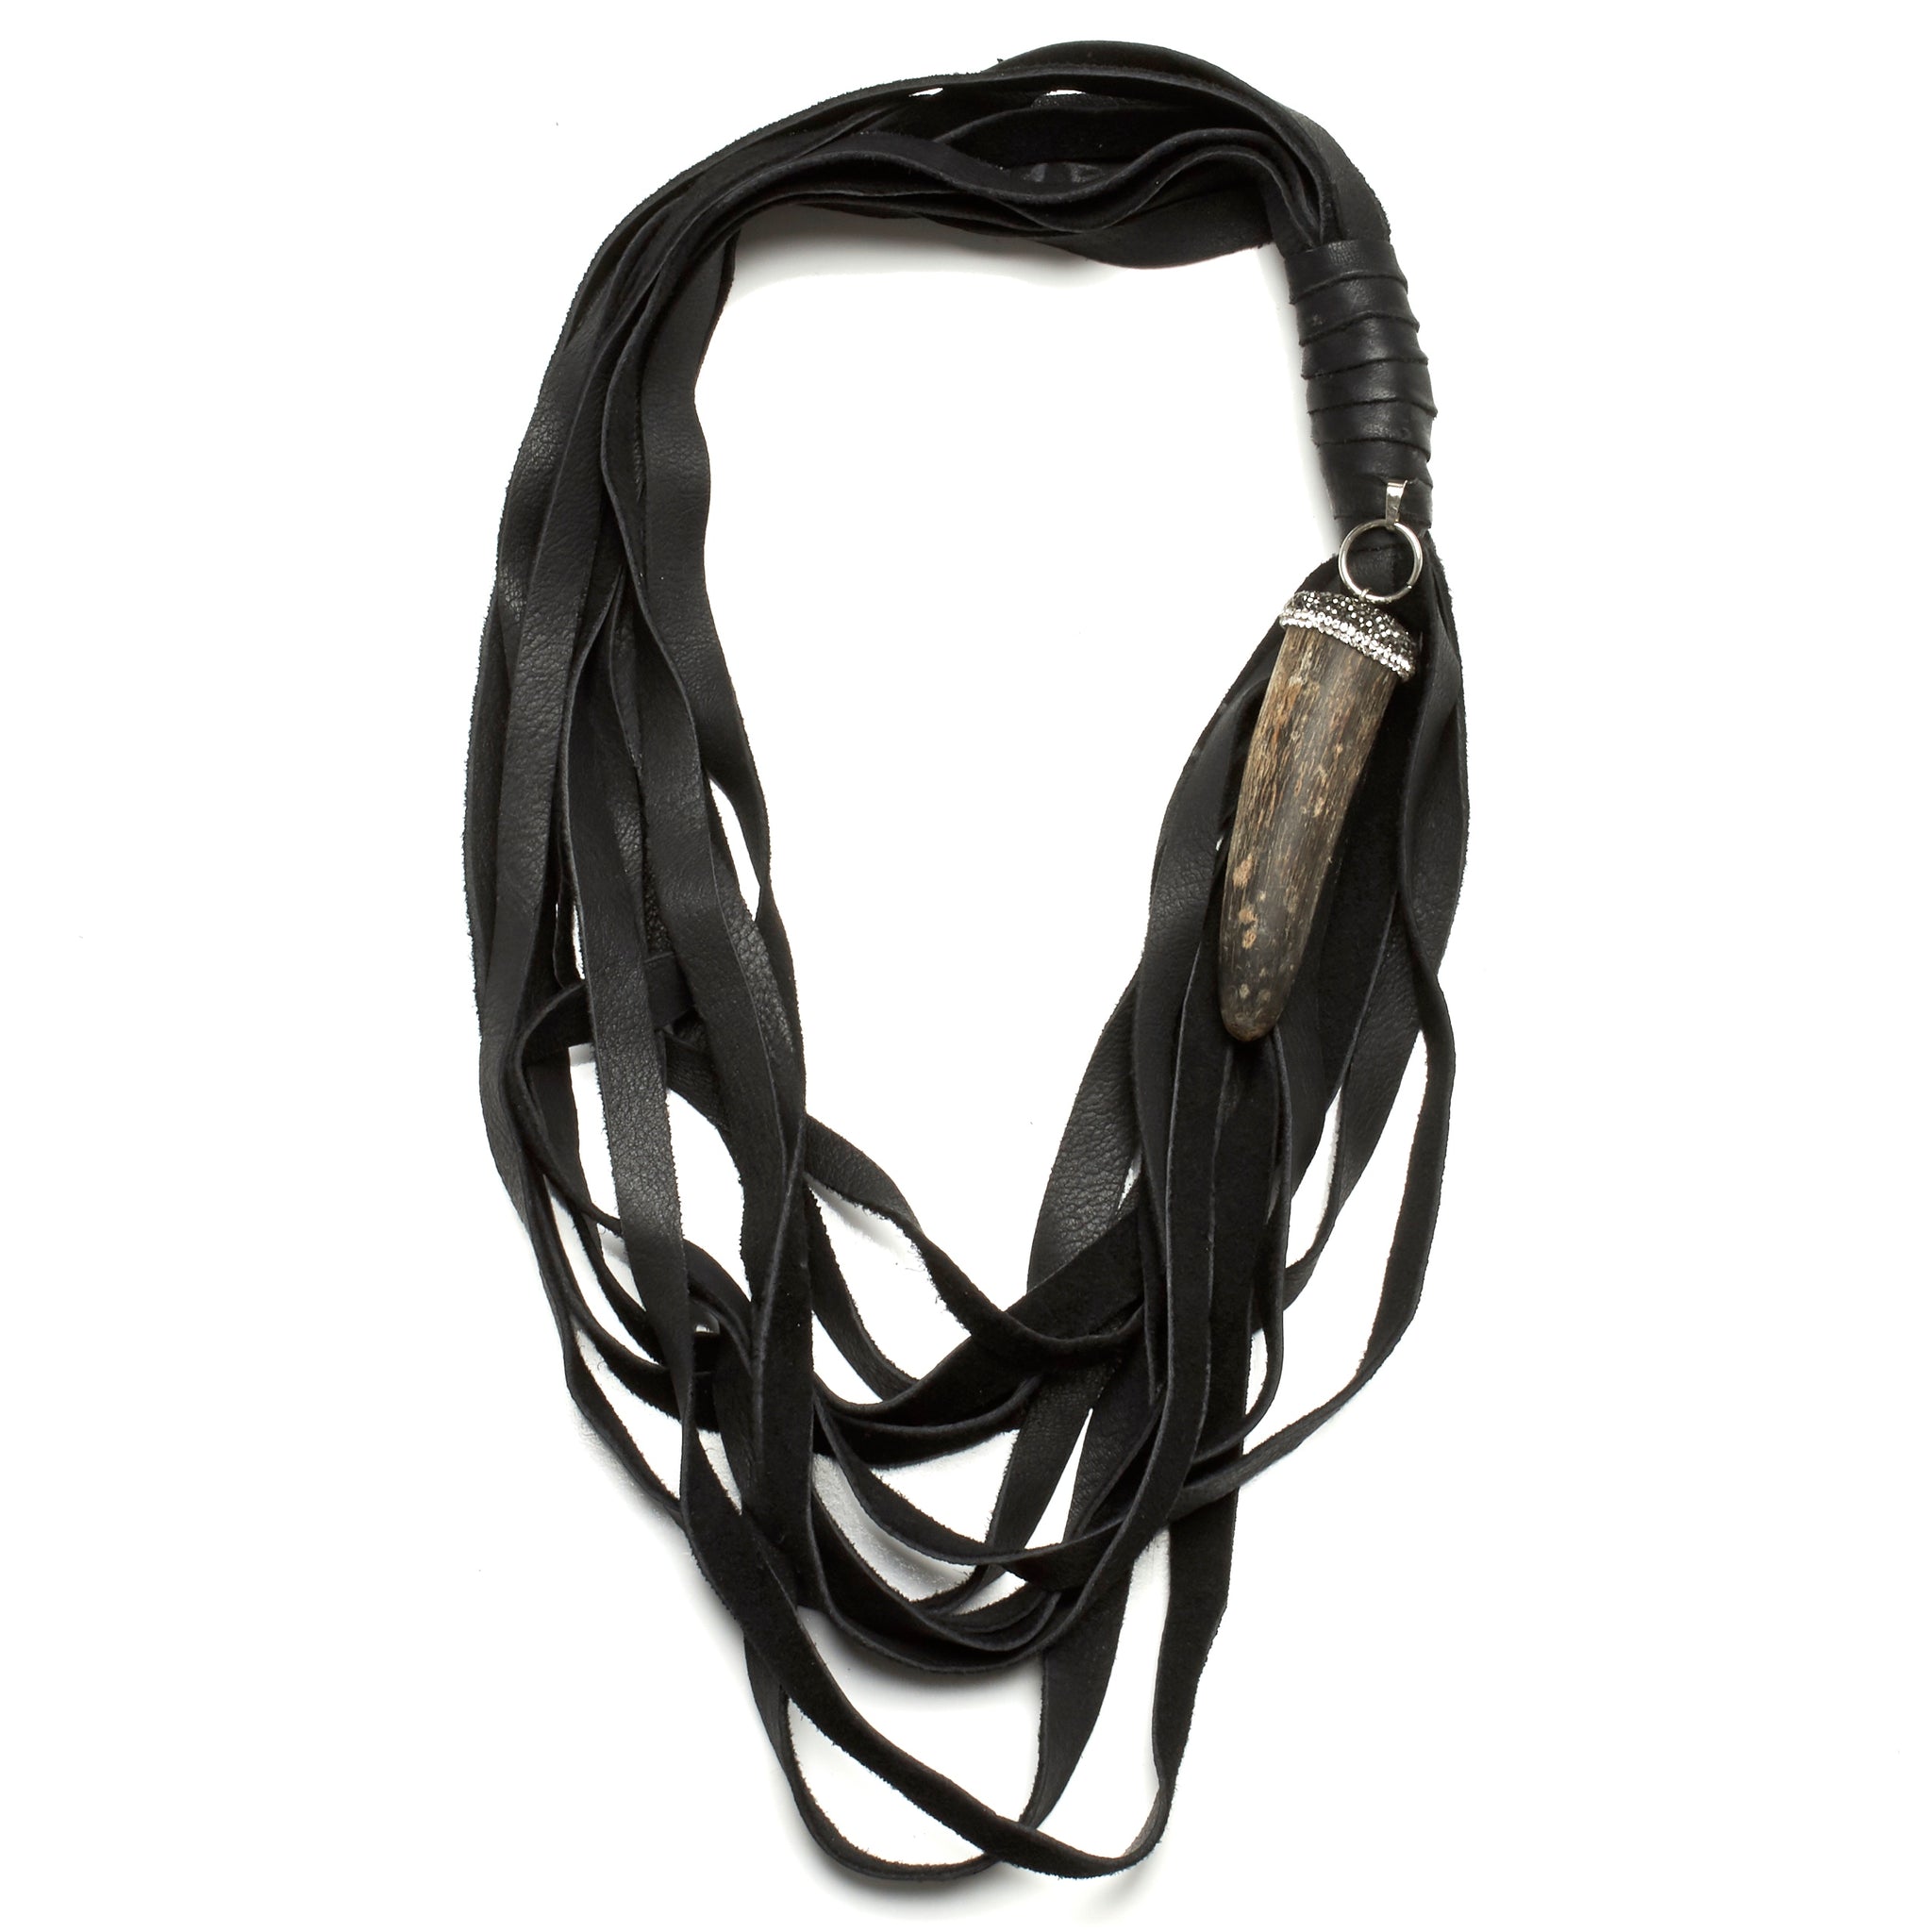 MULTI STRAND DEERSKIN LEATHER NECKLACE WITH PAVE RHINESTONE AND HORN PENDENT. by NYET Jewelry